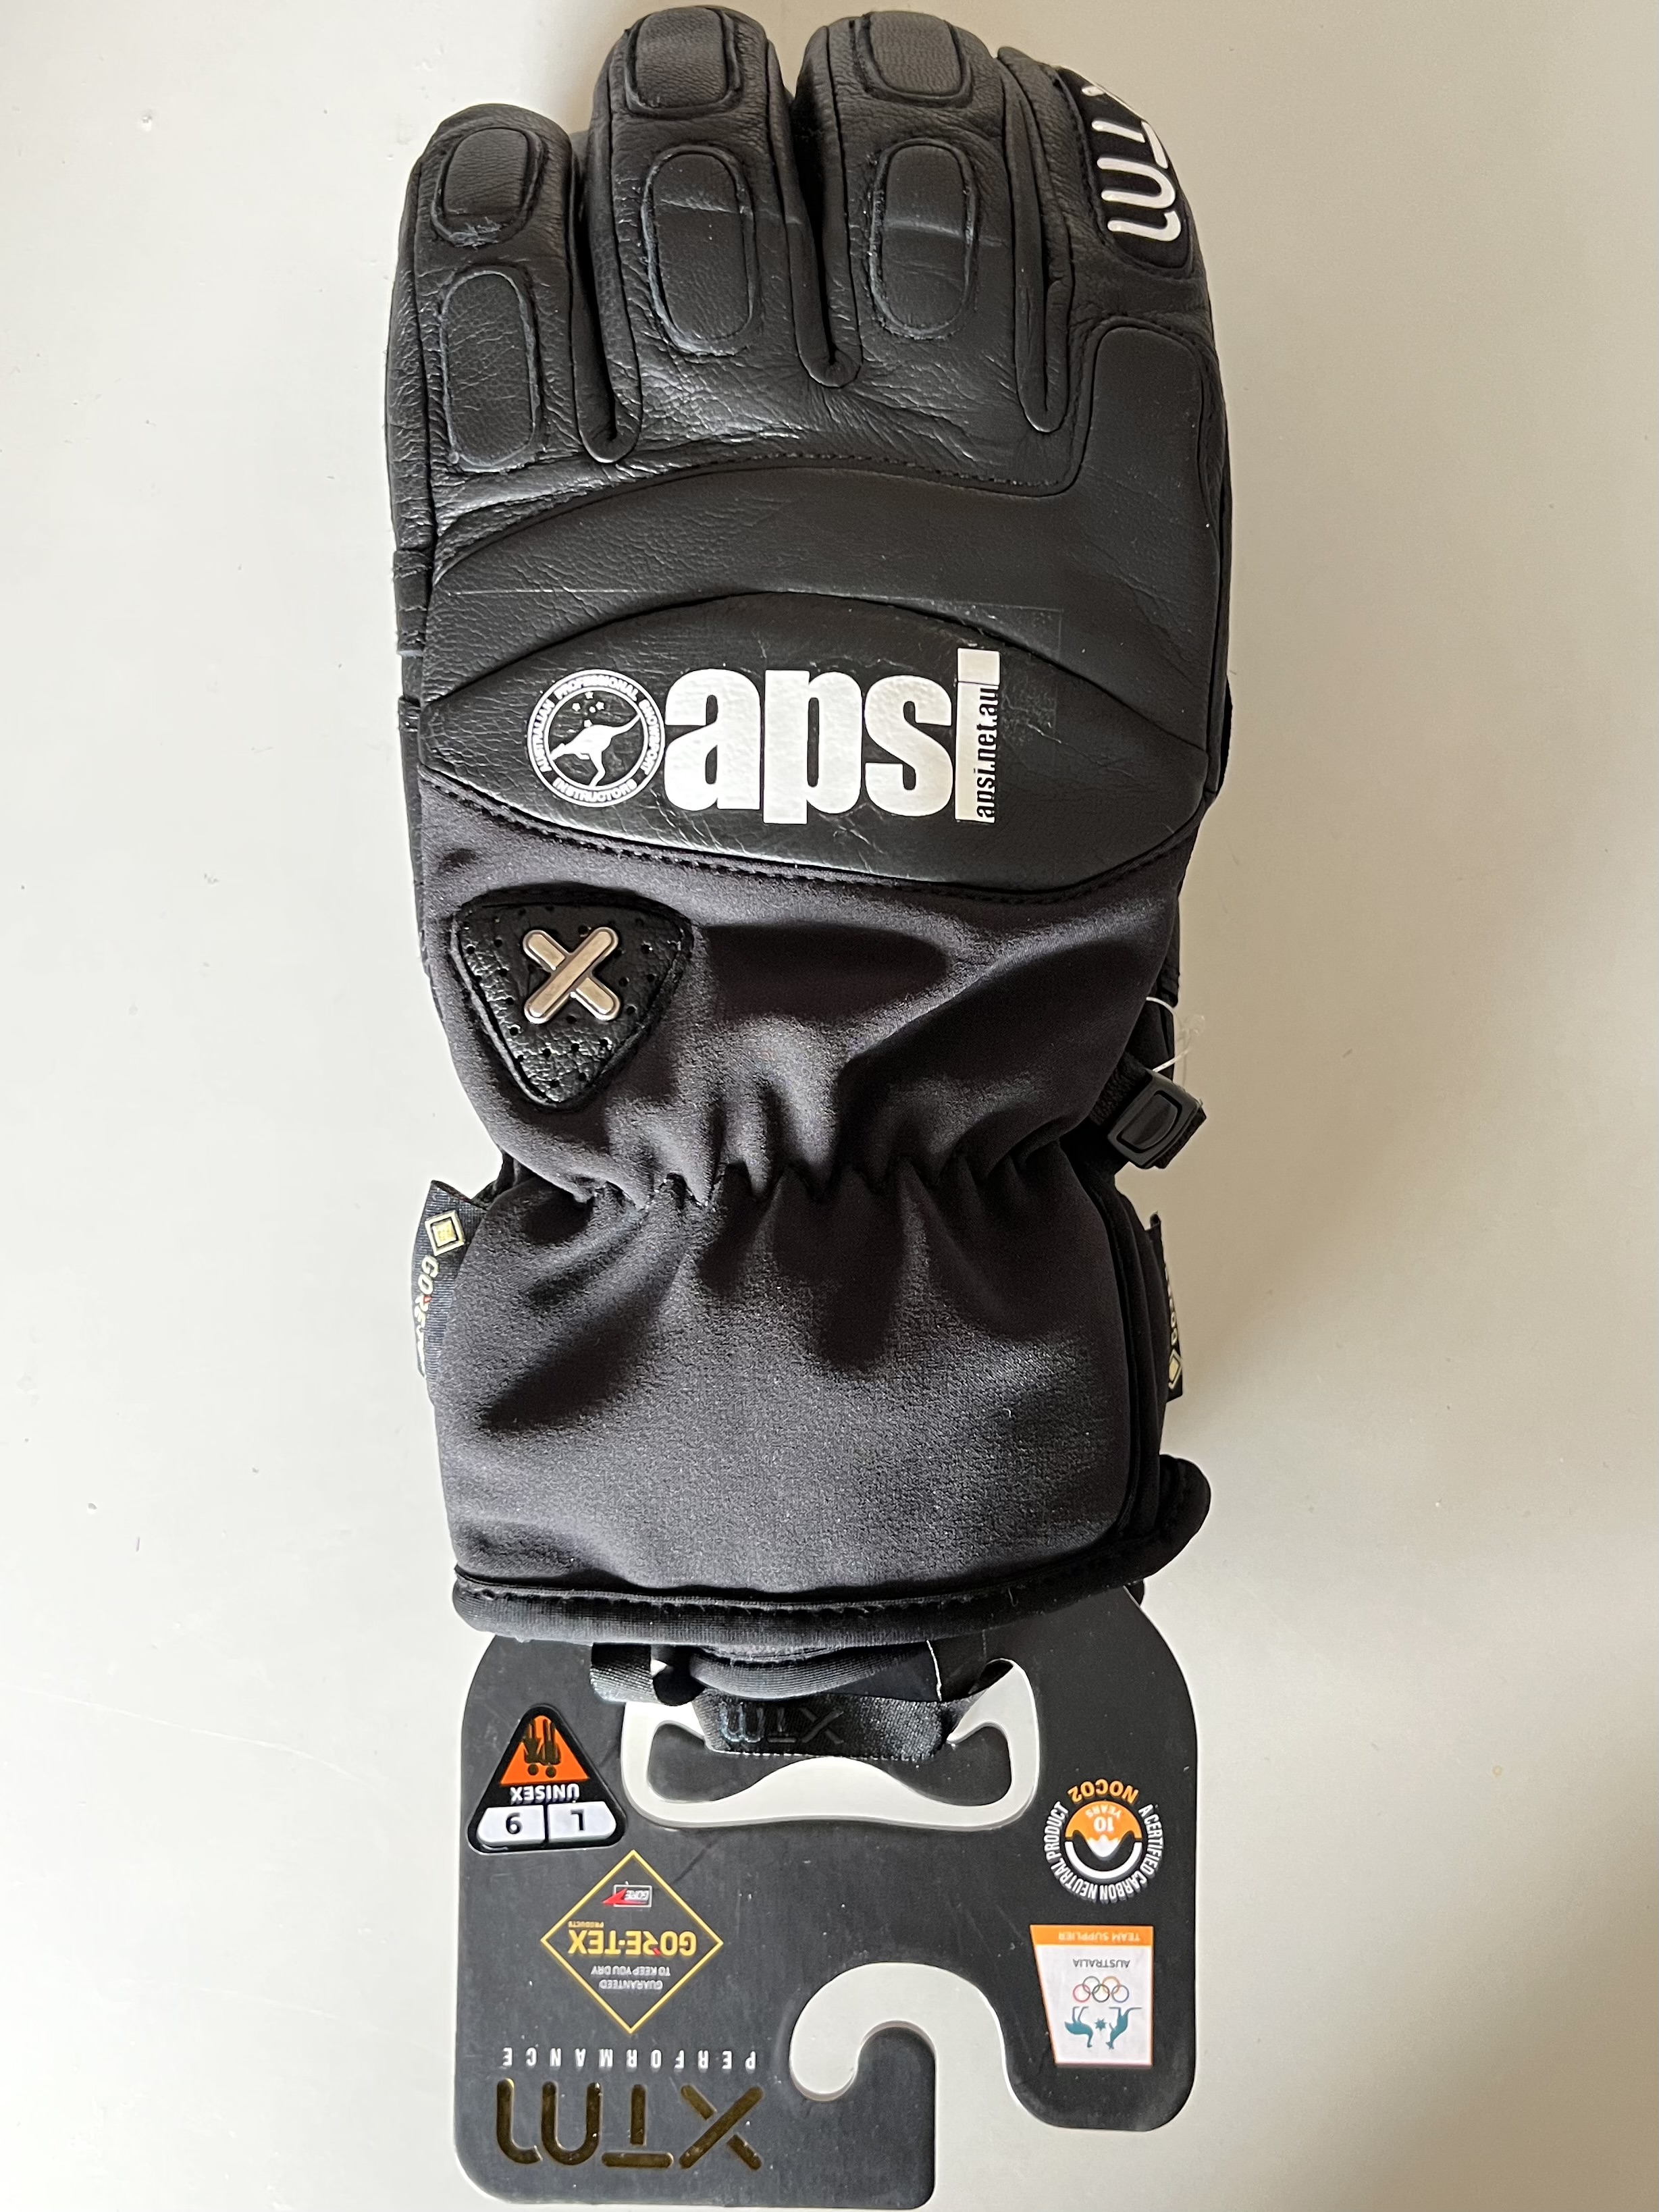 XTM Fable Glove